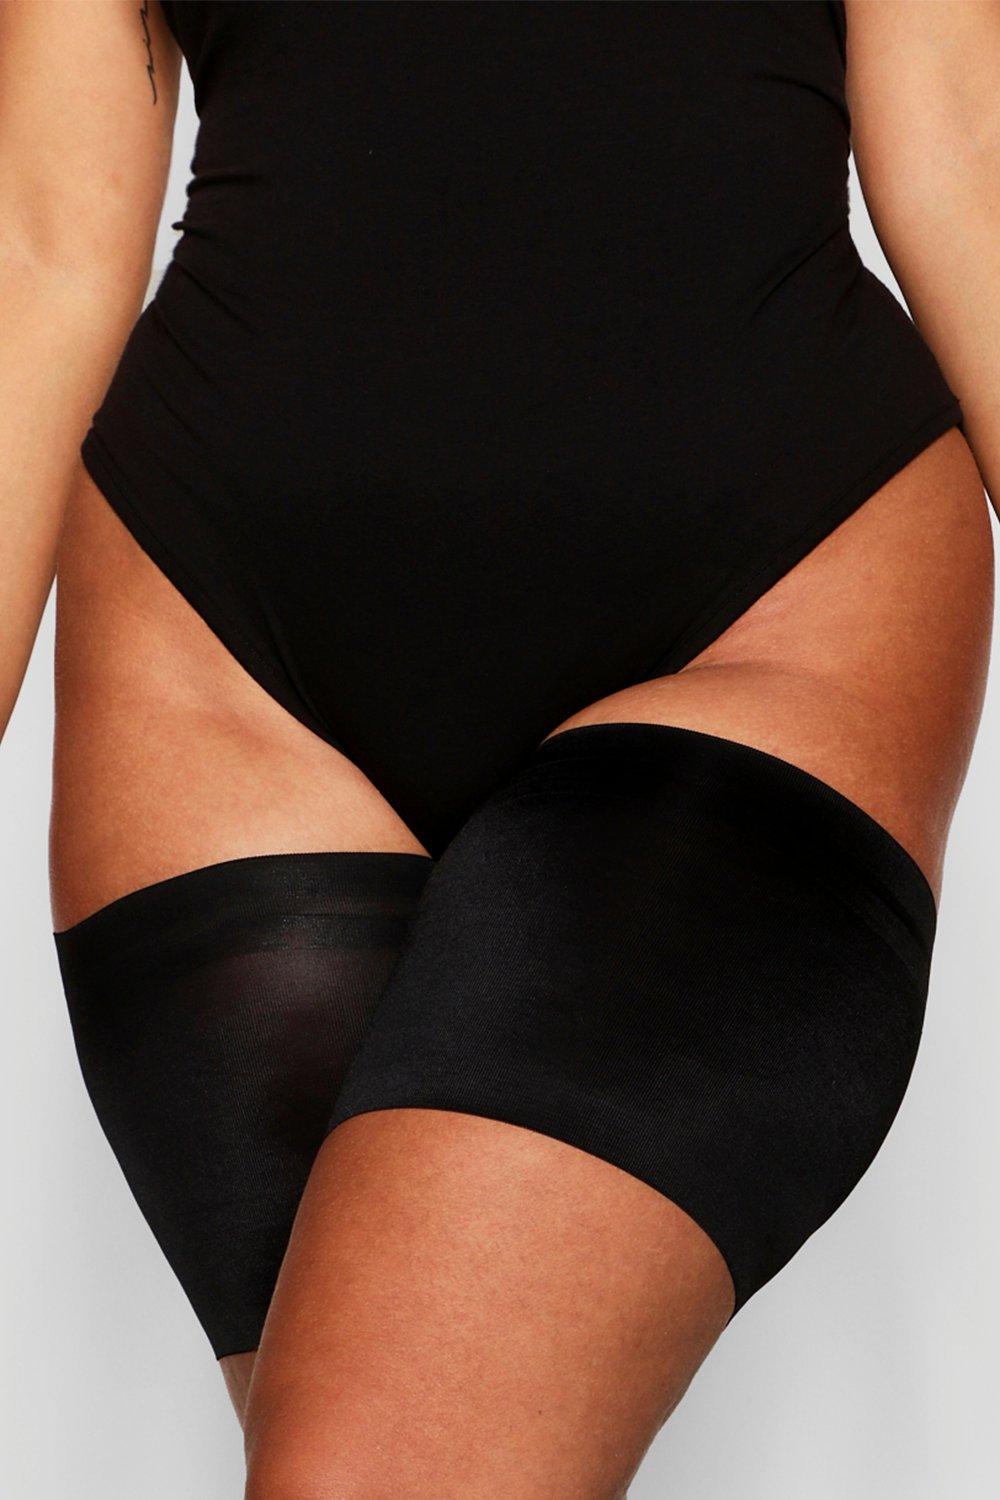 Boohoo Plus 2 Pack Anti Chafing Thigh Bands- Black  - Size: 18